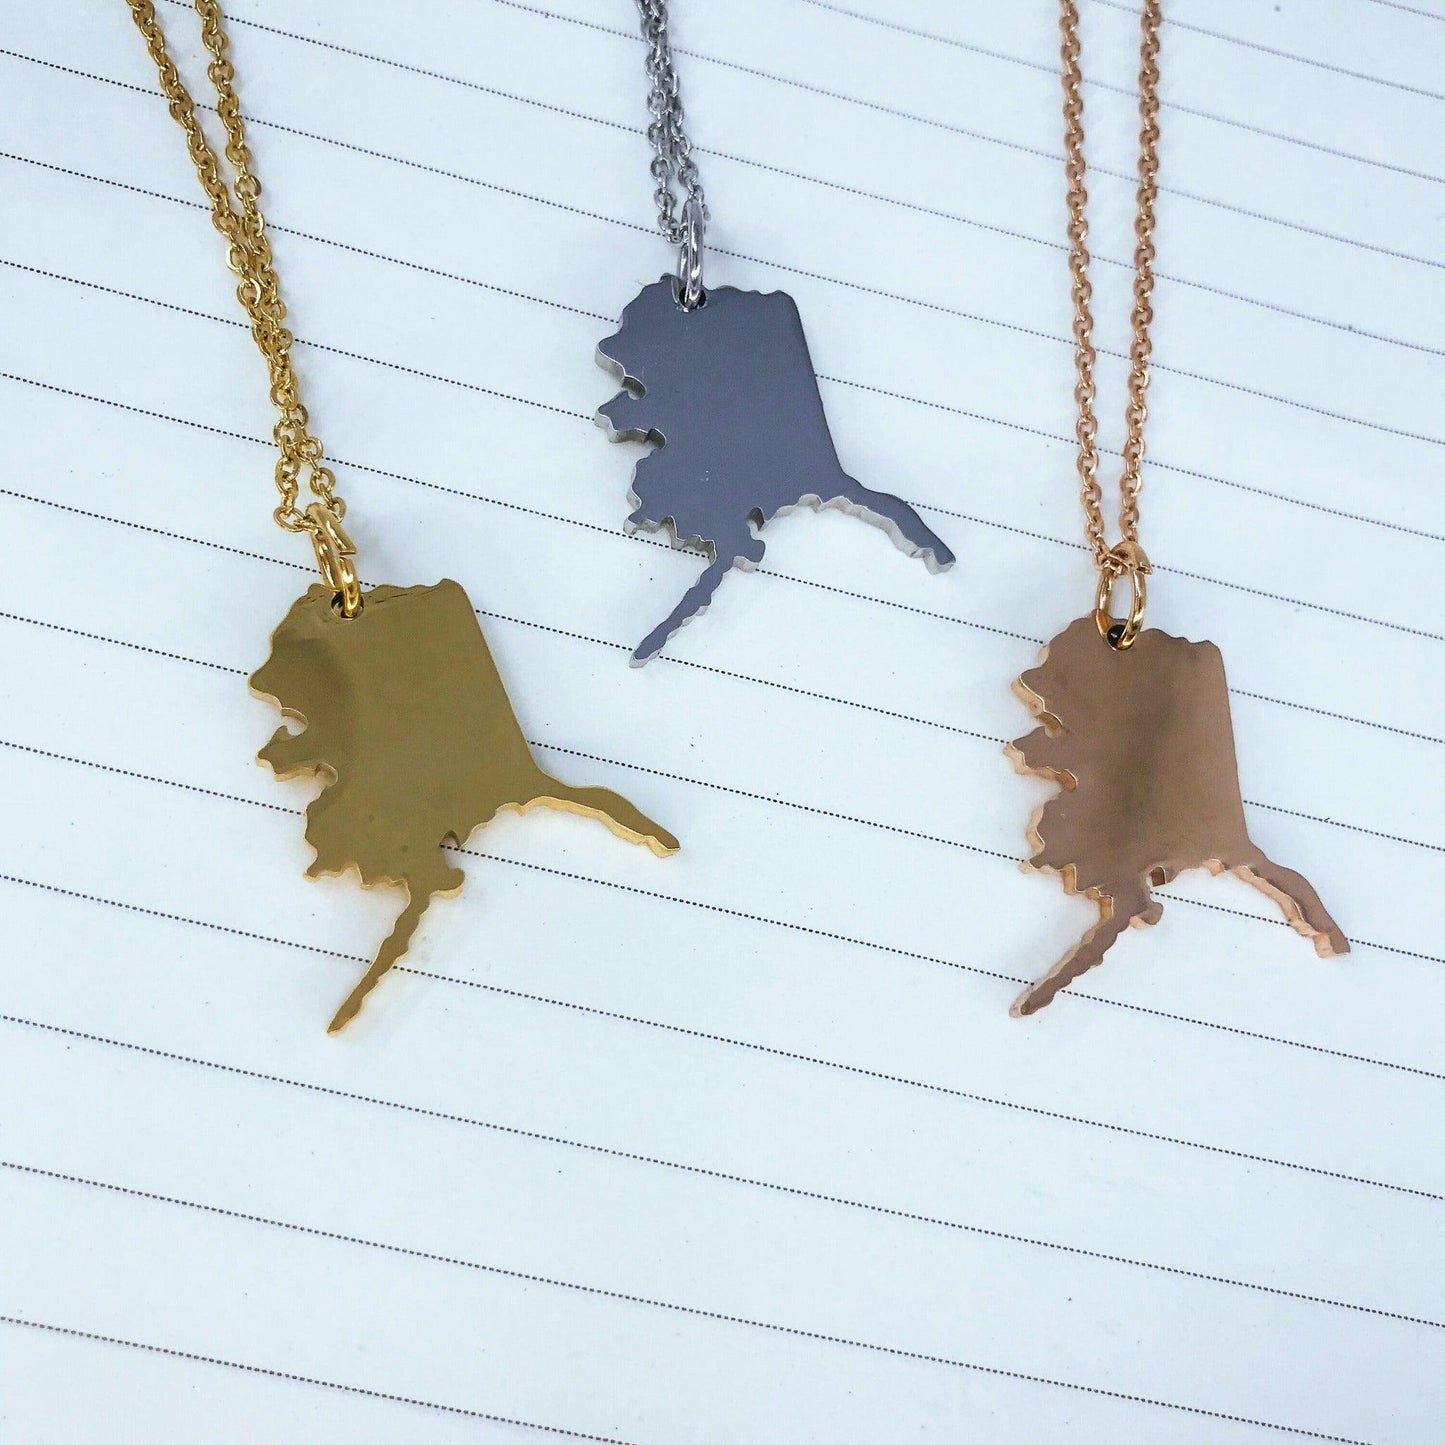 Alaska State Silhouette Necklaces in 3 different colors: Gold, Silver & Rose Gold